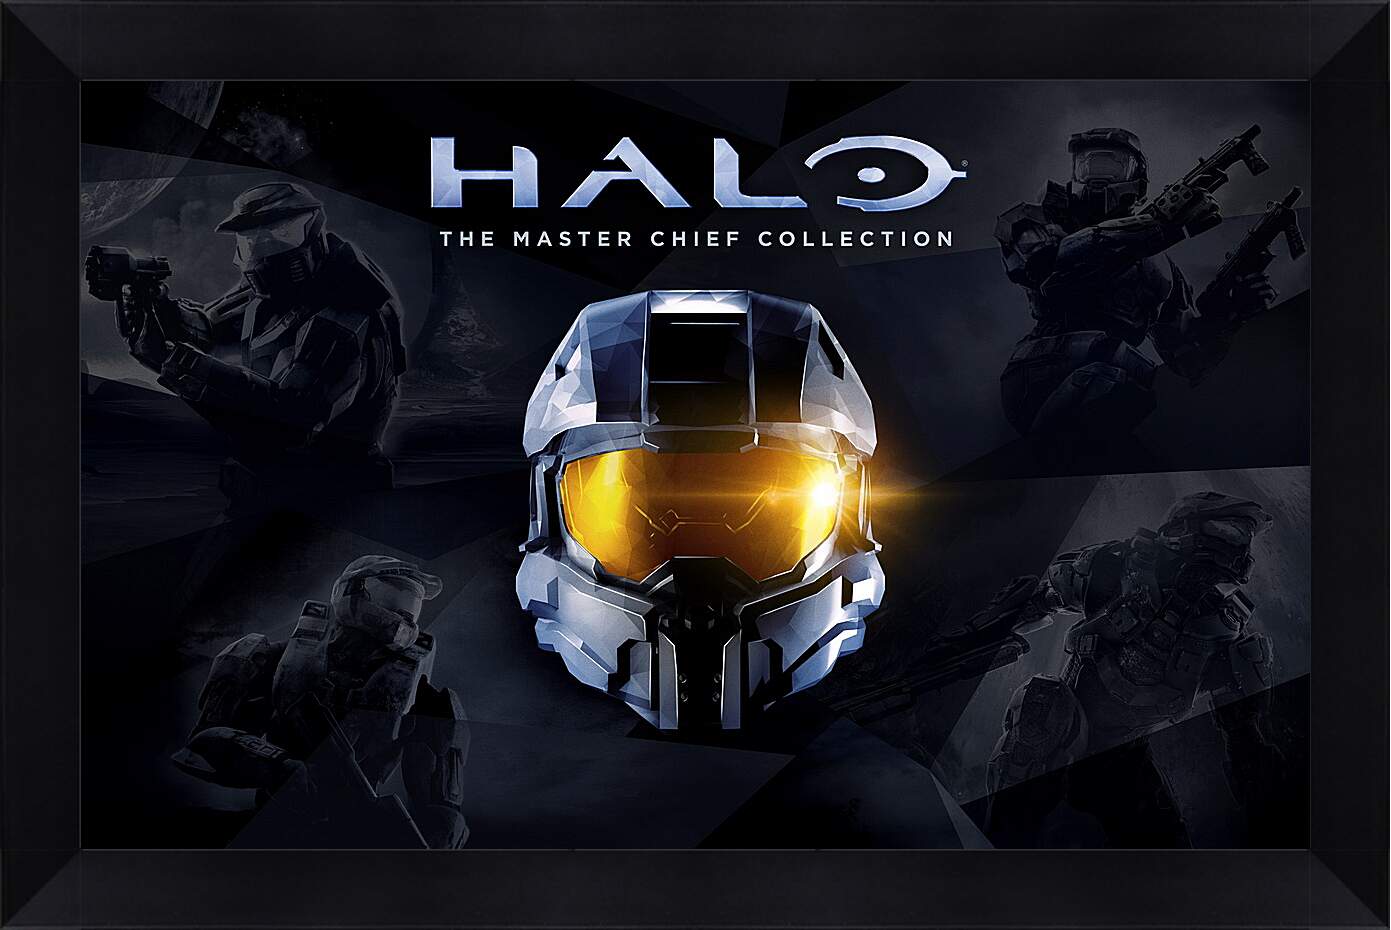 Картина в раме - Halo: The Master Chief Collection